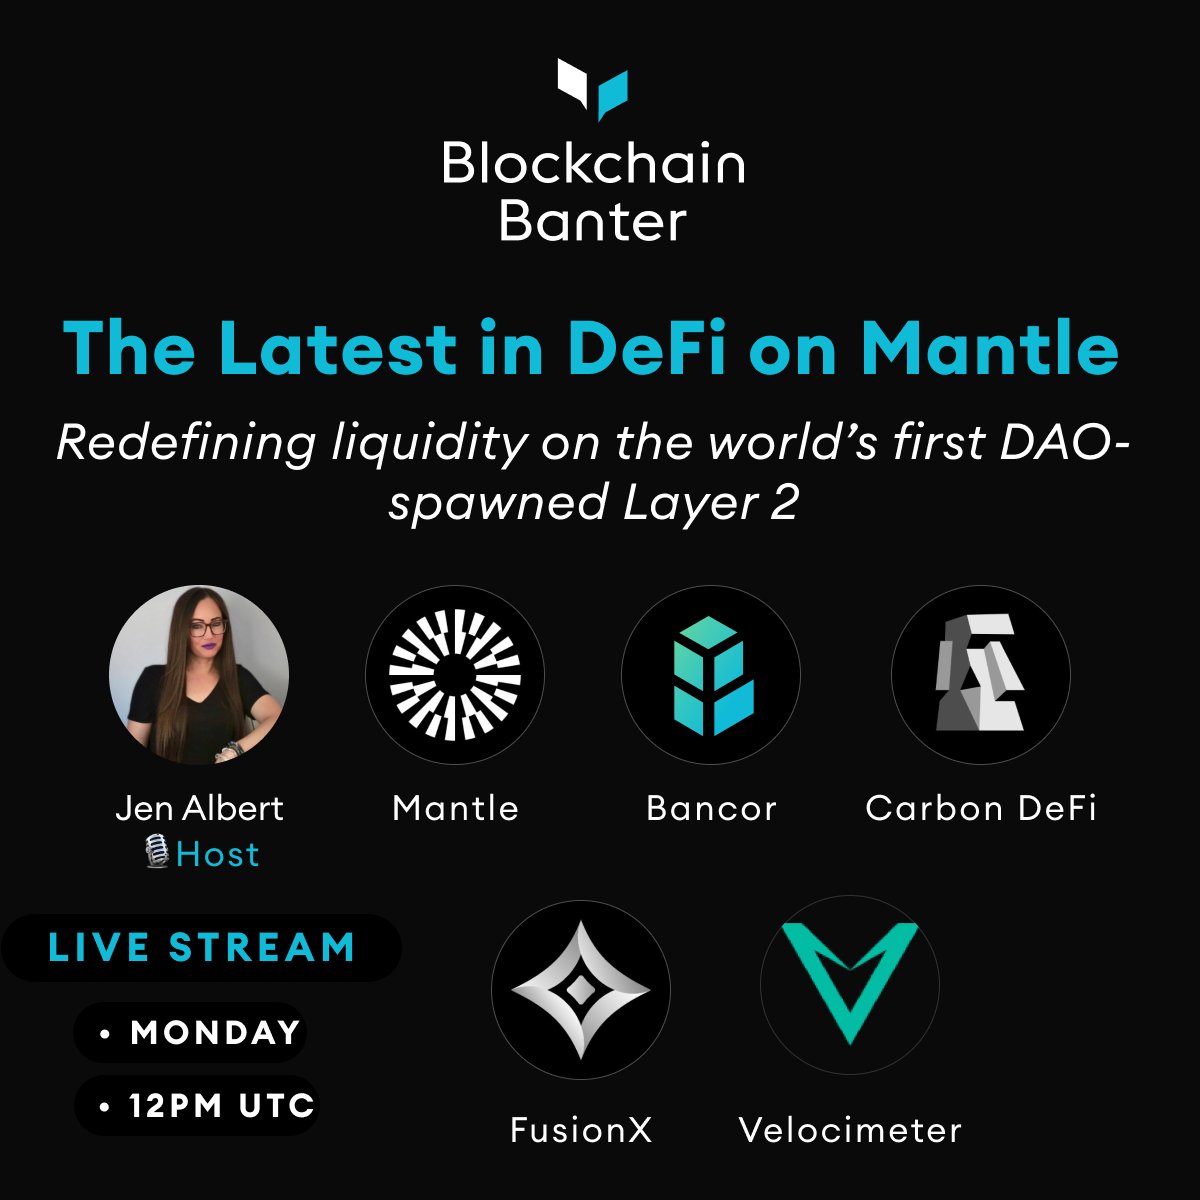 Don't miss the latest in DeFi on Mantle, Monday May 6th on Blockchain Banter!! 🎯 Streaming LIVE with special guests: @0xMantle • @Bancor • @CarbonDeFixyz • @FusionX_Finance • @VelocimeterDEX